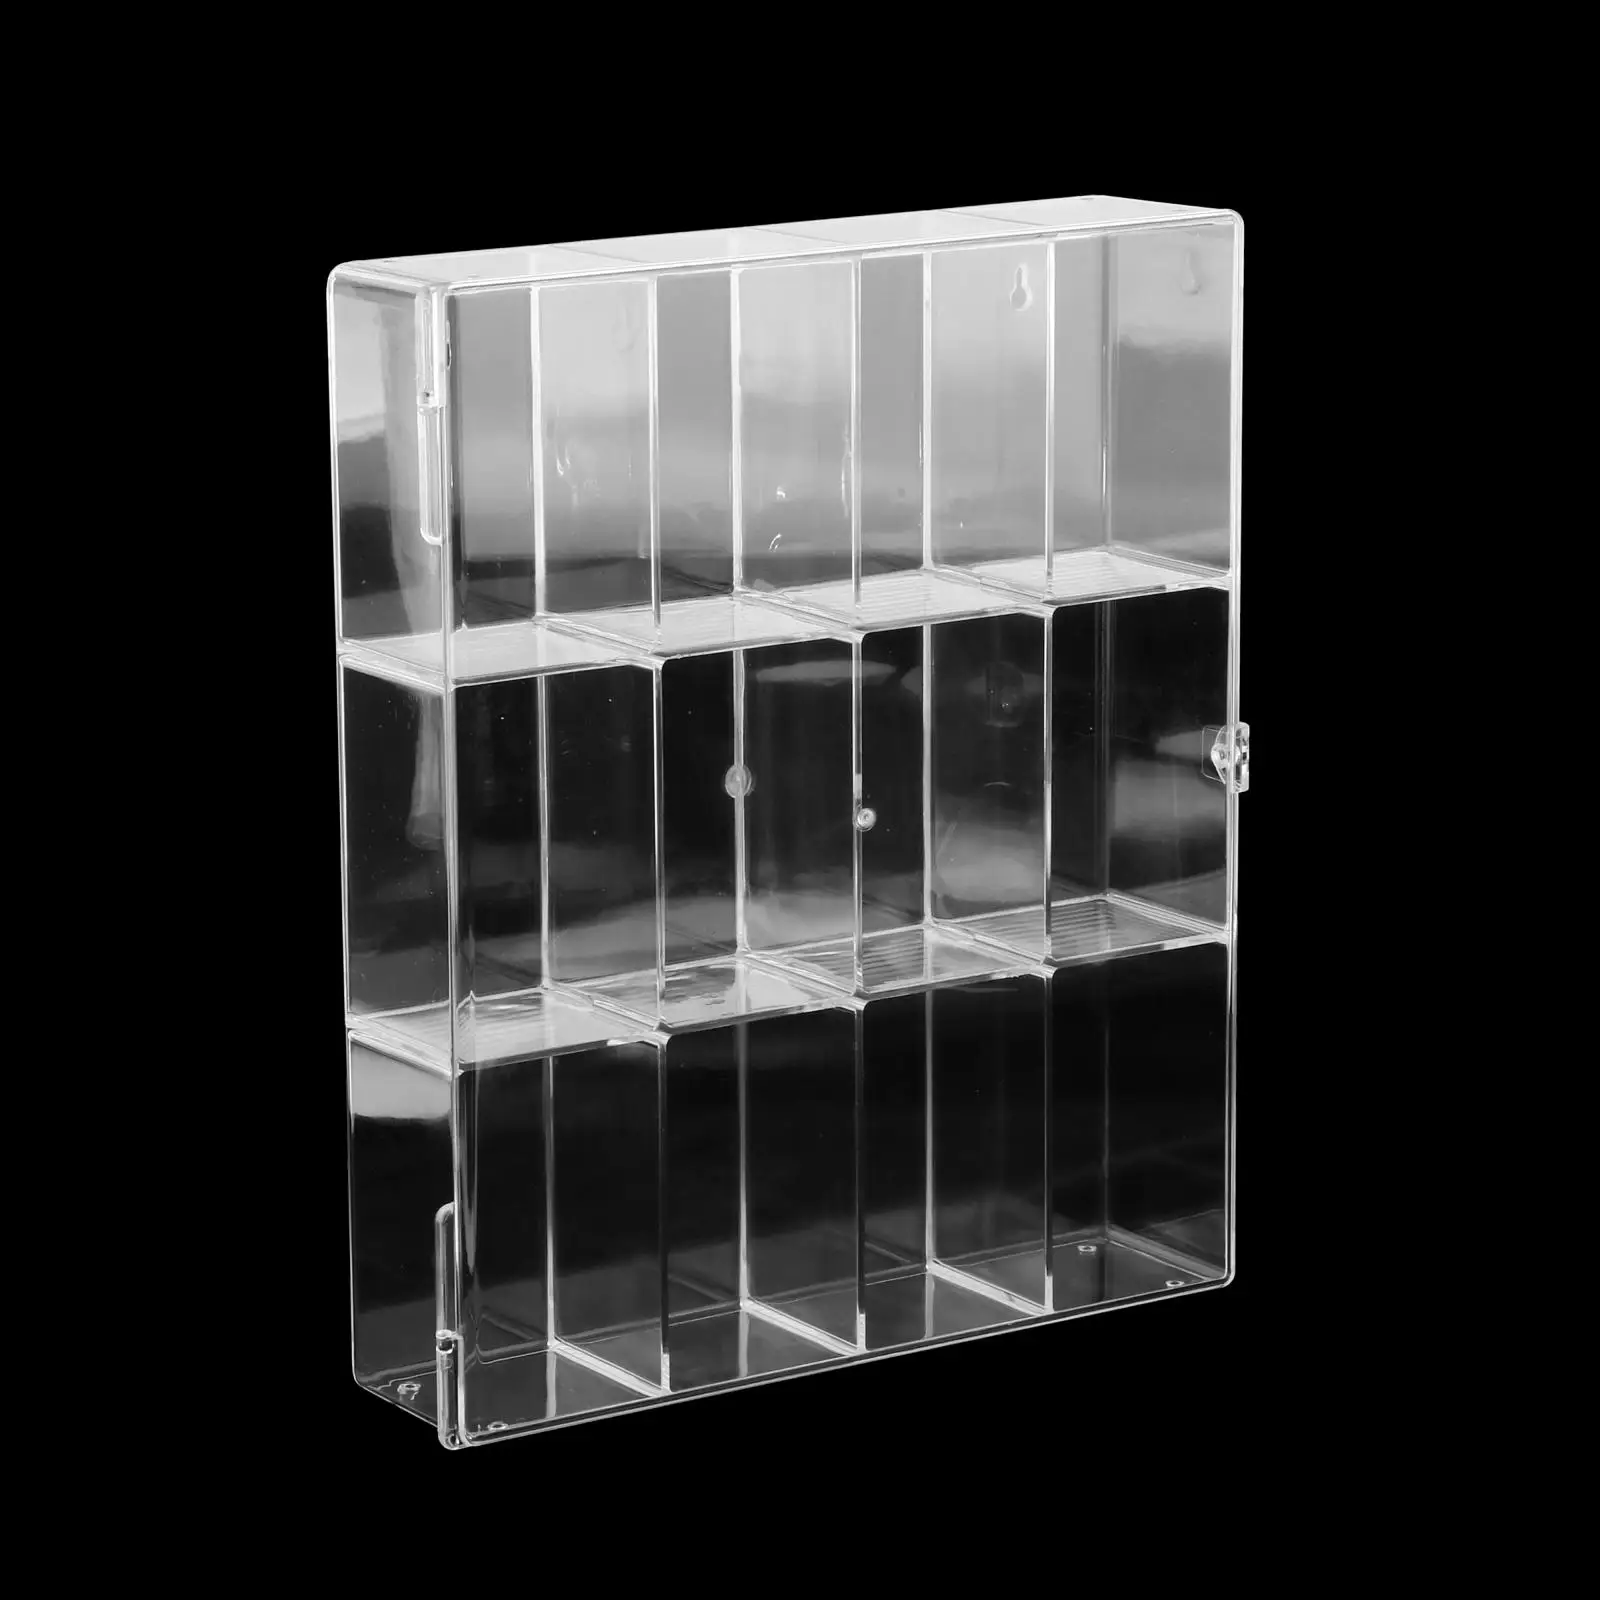 10x10x14cm Acrylic Display Case w/ Black Base for Anime Figure Collection 